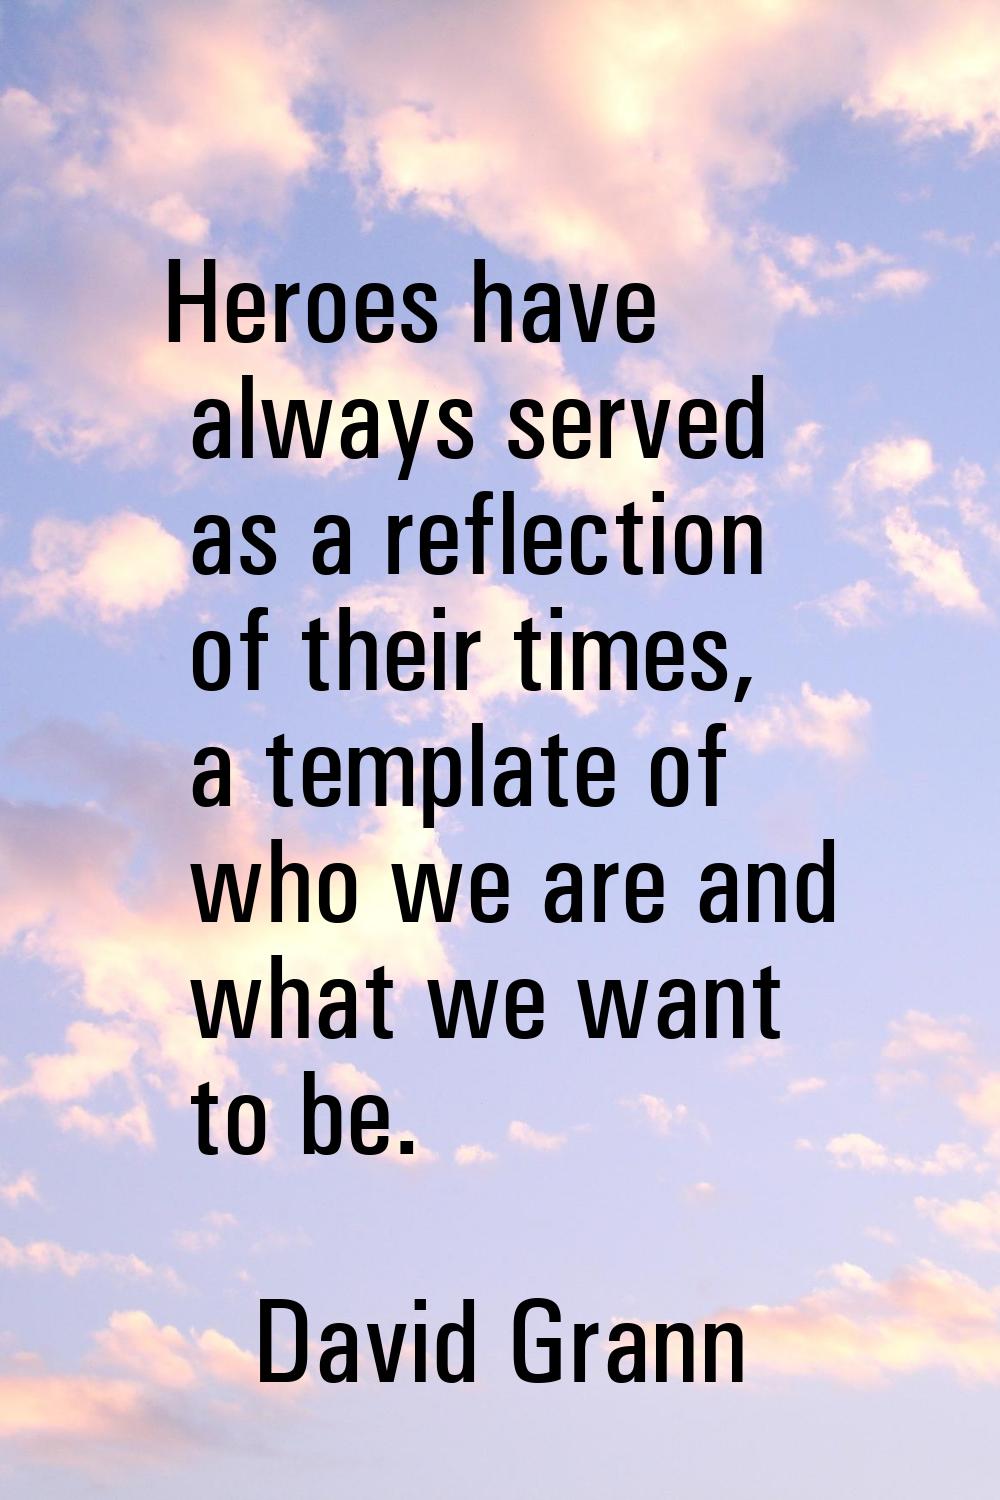 Heroes have always served as a reflection of their times, a template of who we are and what we want